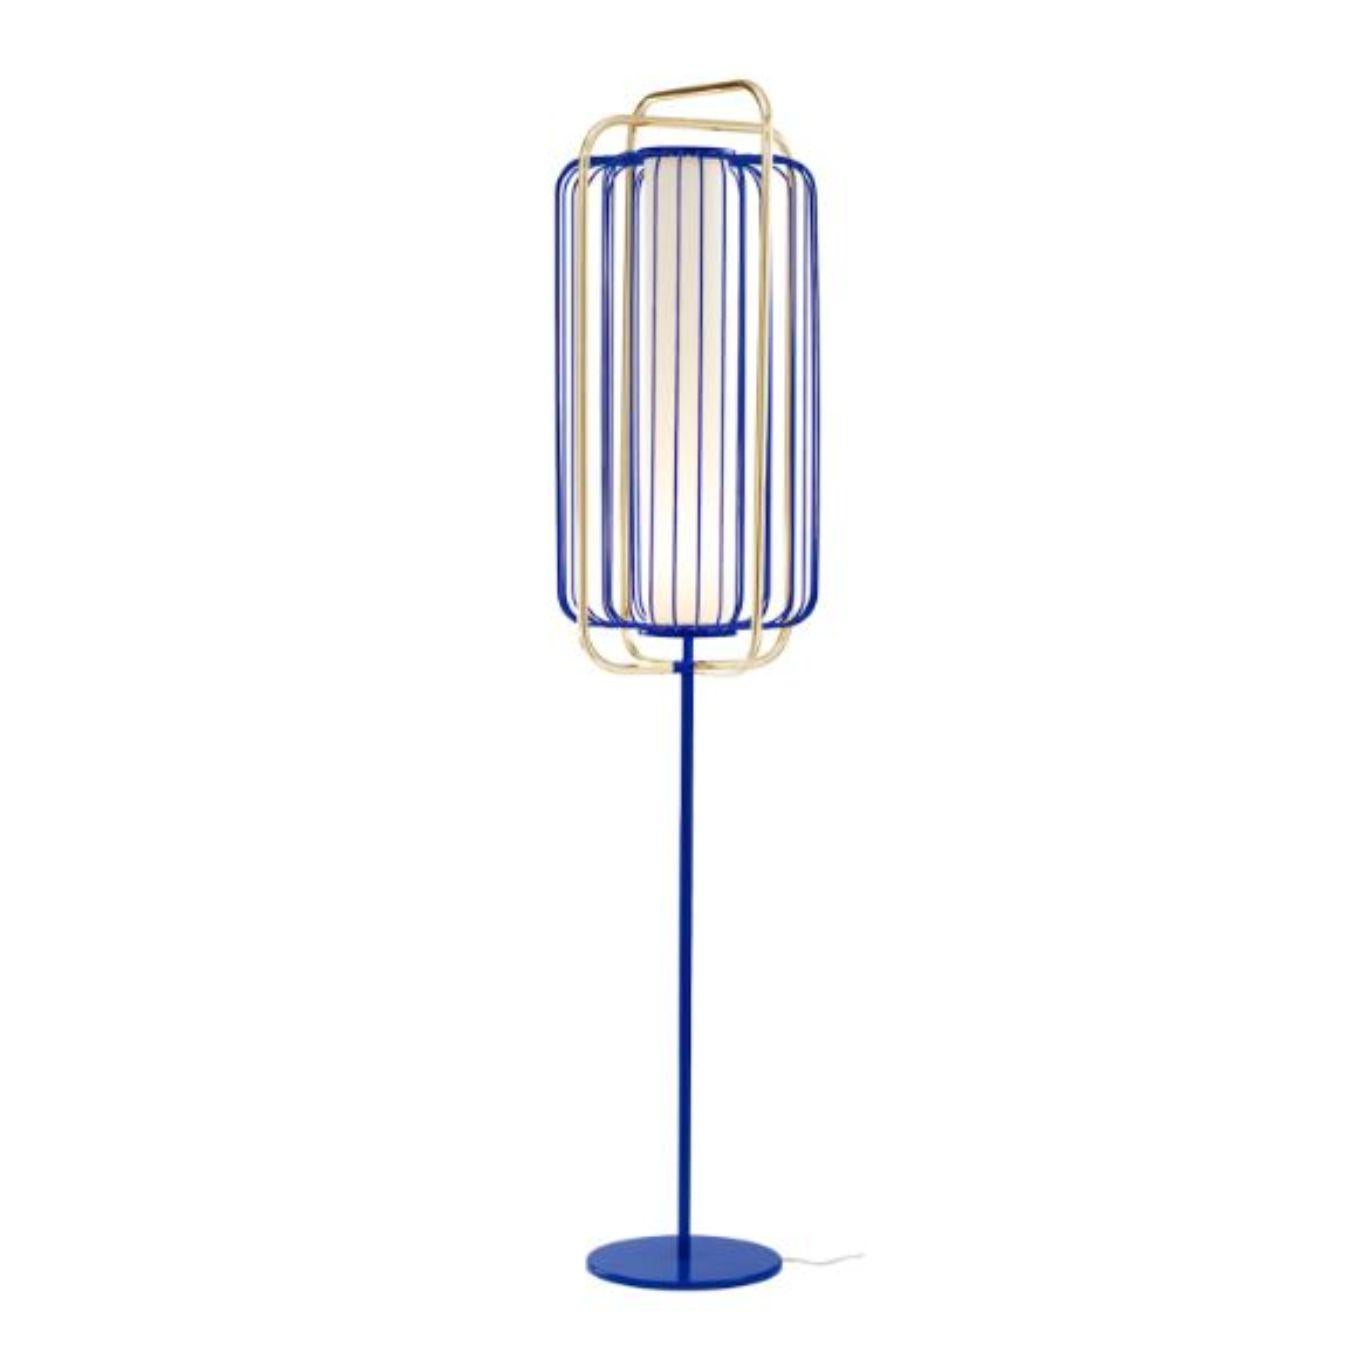 Brass and Cobalt Jules floor lamp by Dooq
Dimensions: W 38 x D 38 x H 177 cm
Materials: lacquered metal, polished or brushed metal, brass.
Abat-jour: cotton
Also available in different colors and materials. 

Information:
230V/50Hz
E27/1x20W